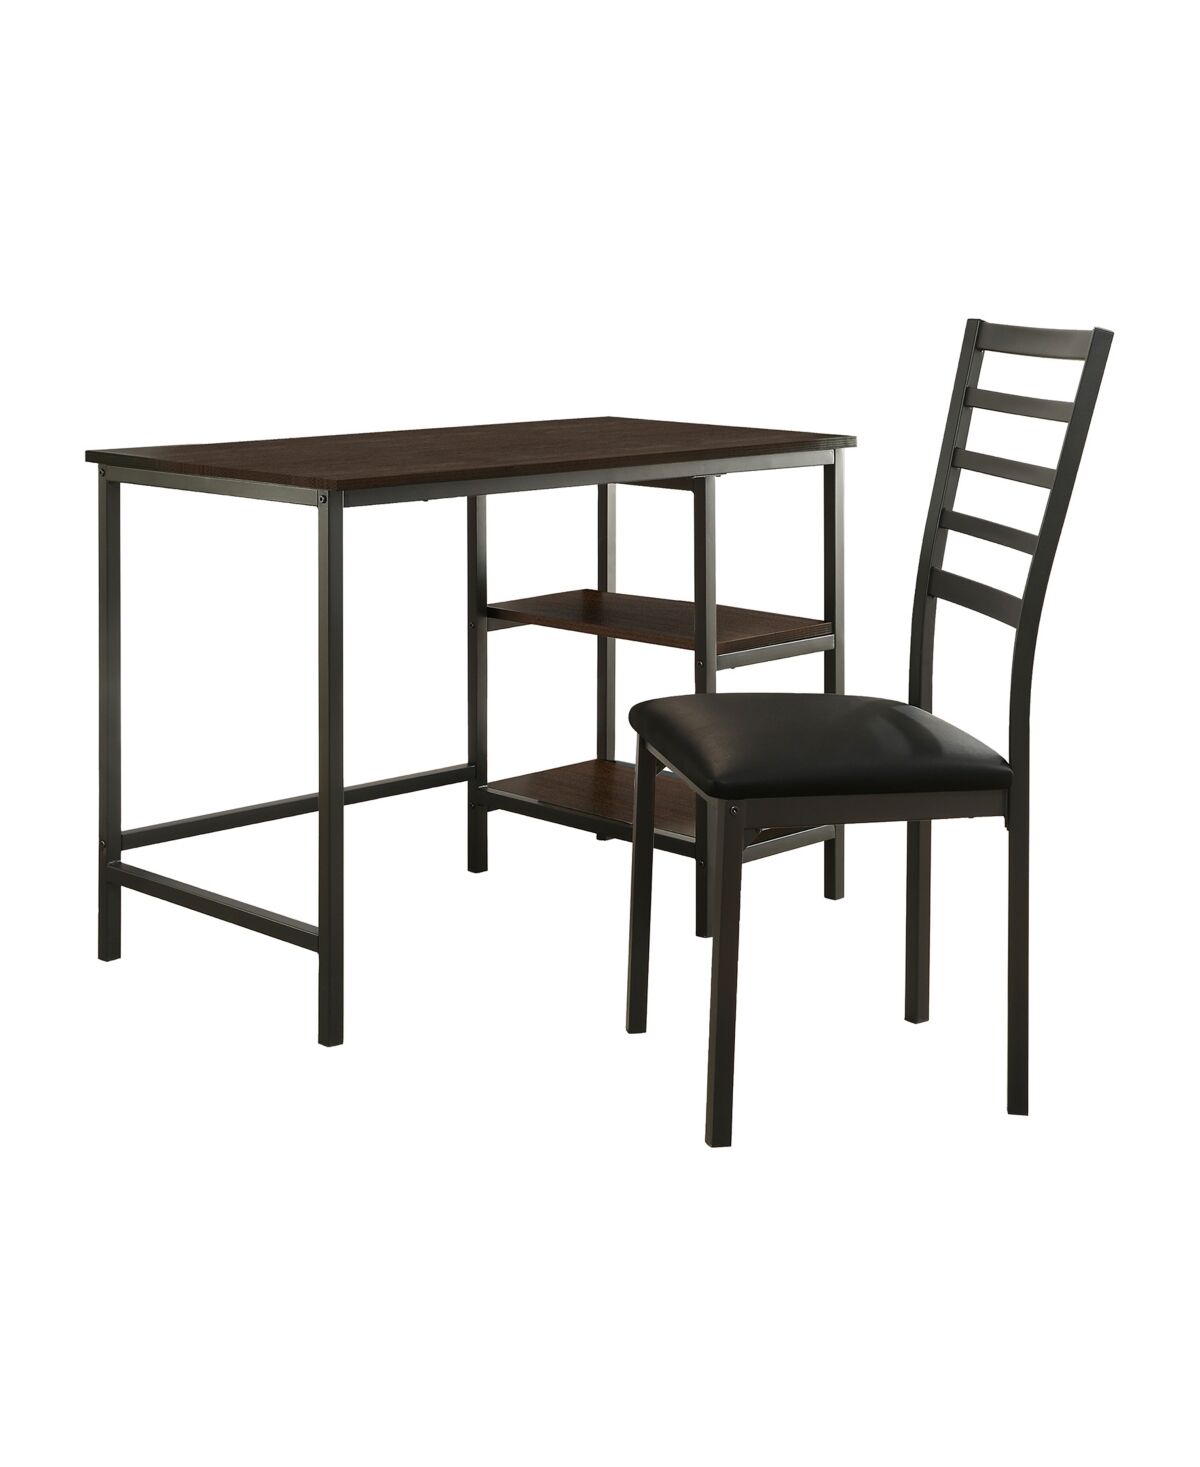 Furniture Amherst Writing Desk with Chair - Black